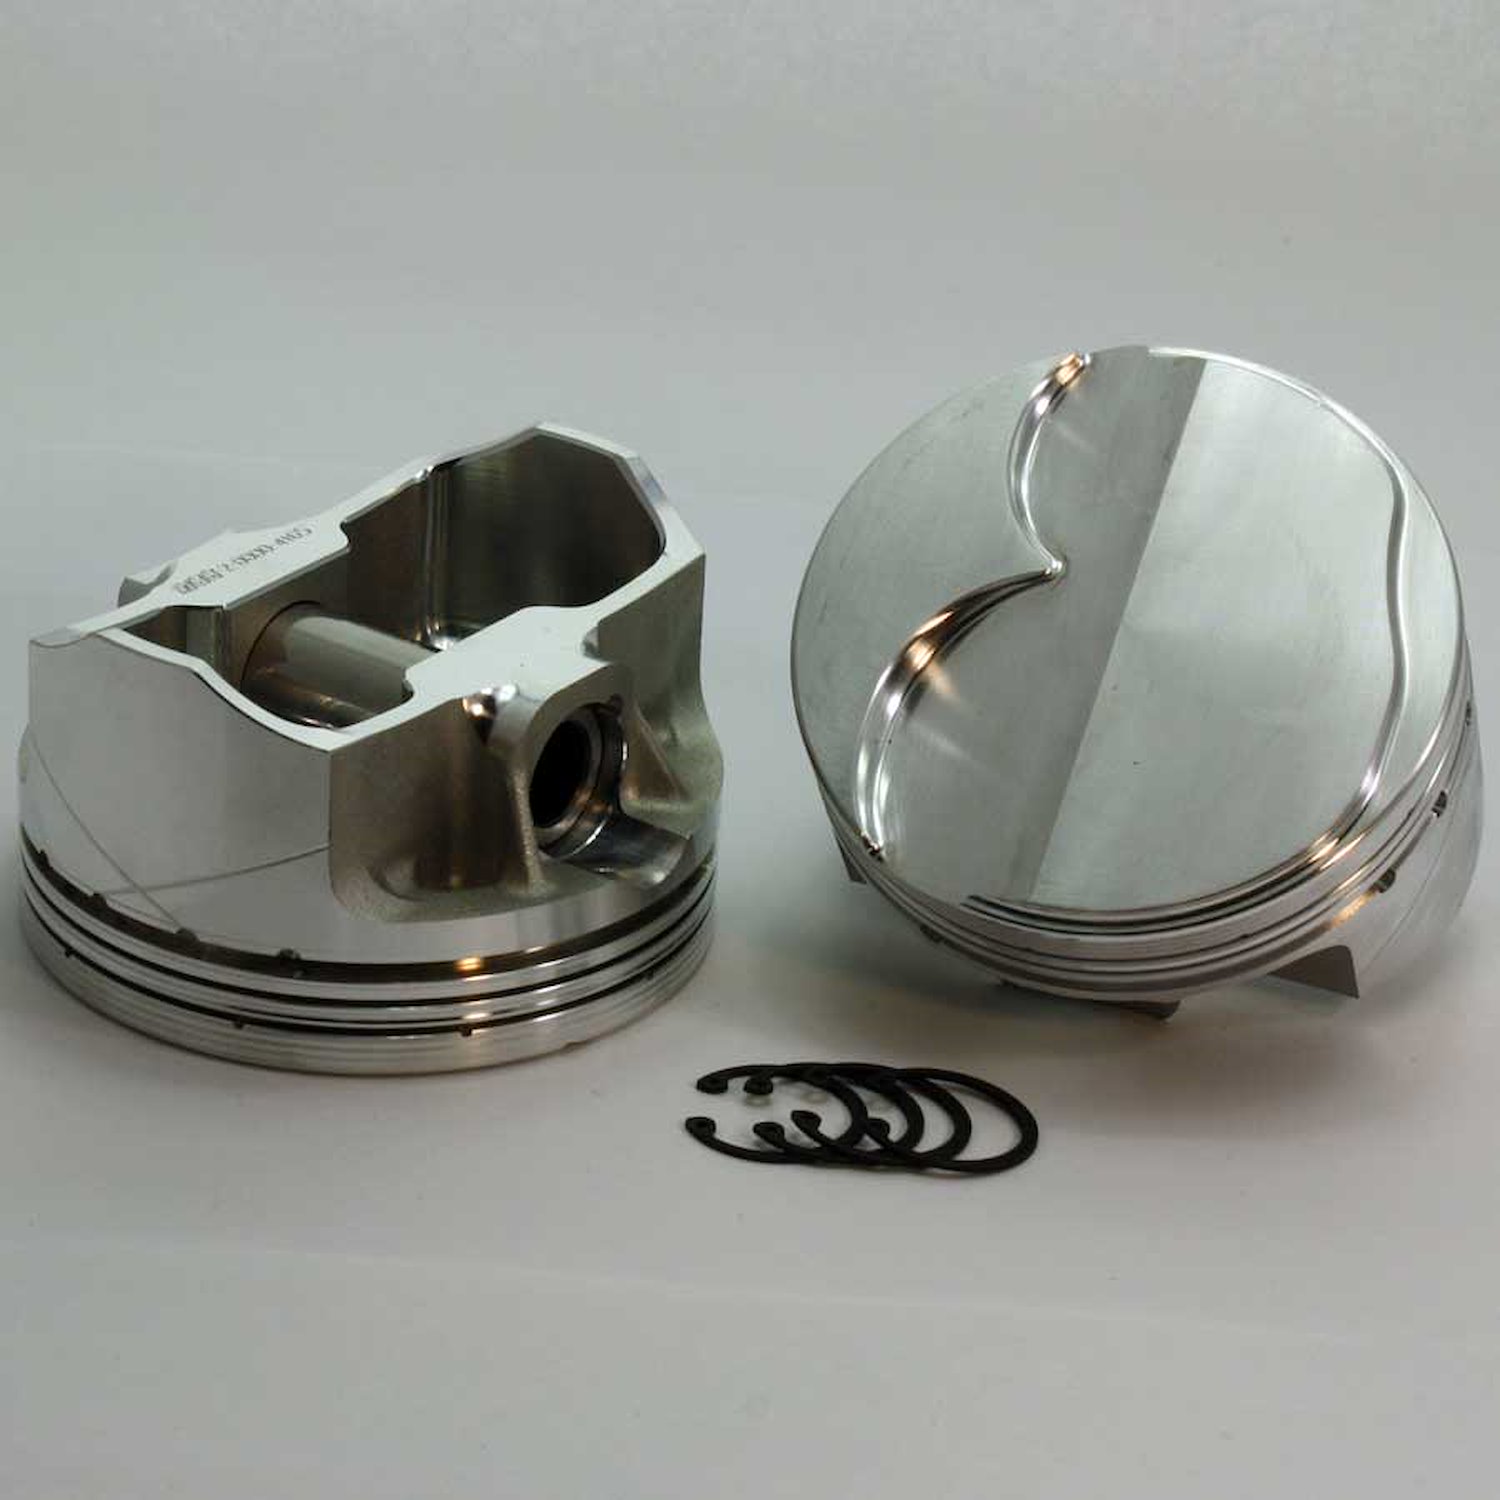 3-2802-3898 FX-Series Dome Top Piston Set for 1997-2005 Chevy LS, 3.898 in. Bore, +6cc Volume [OEM Stroke]